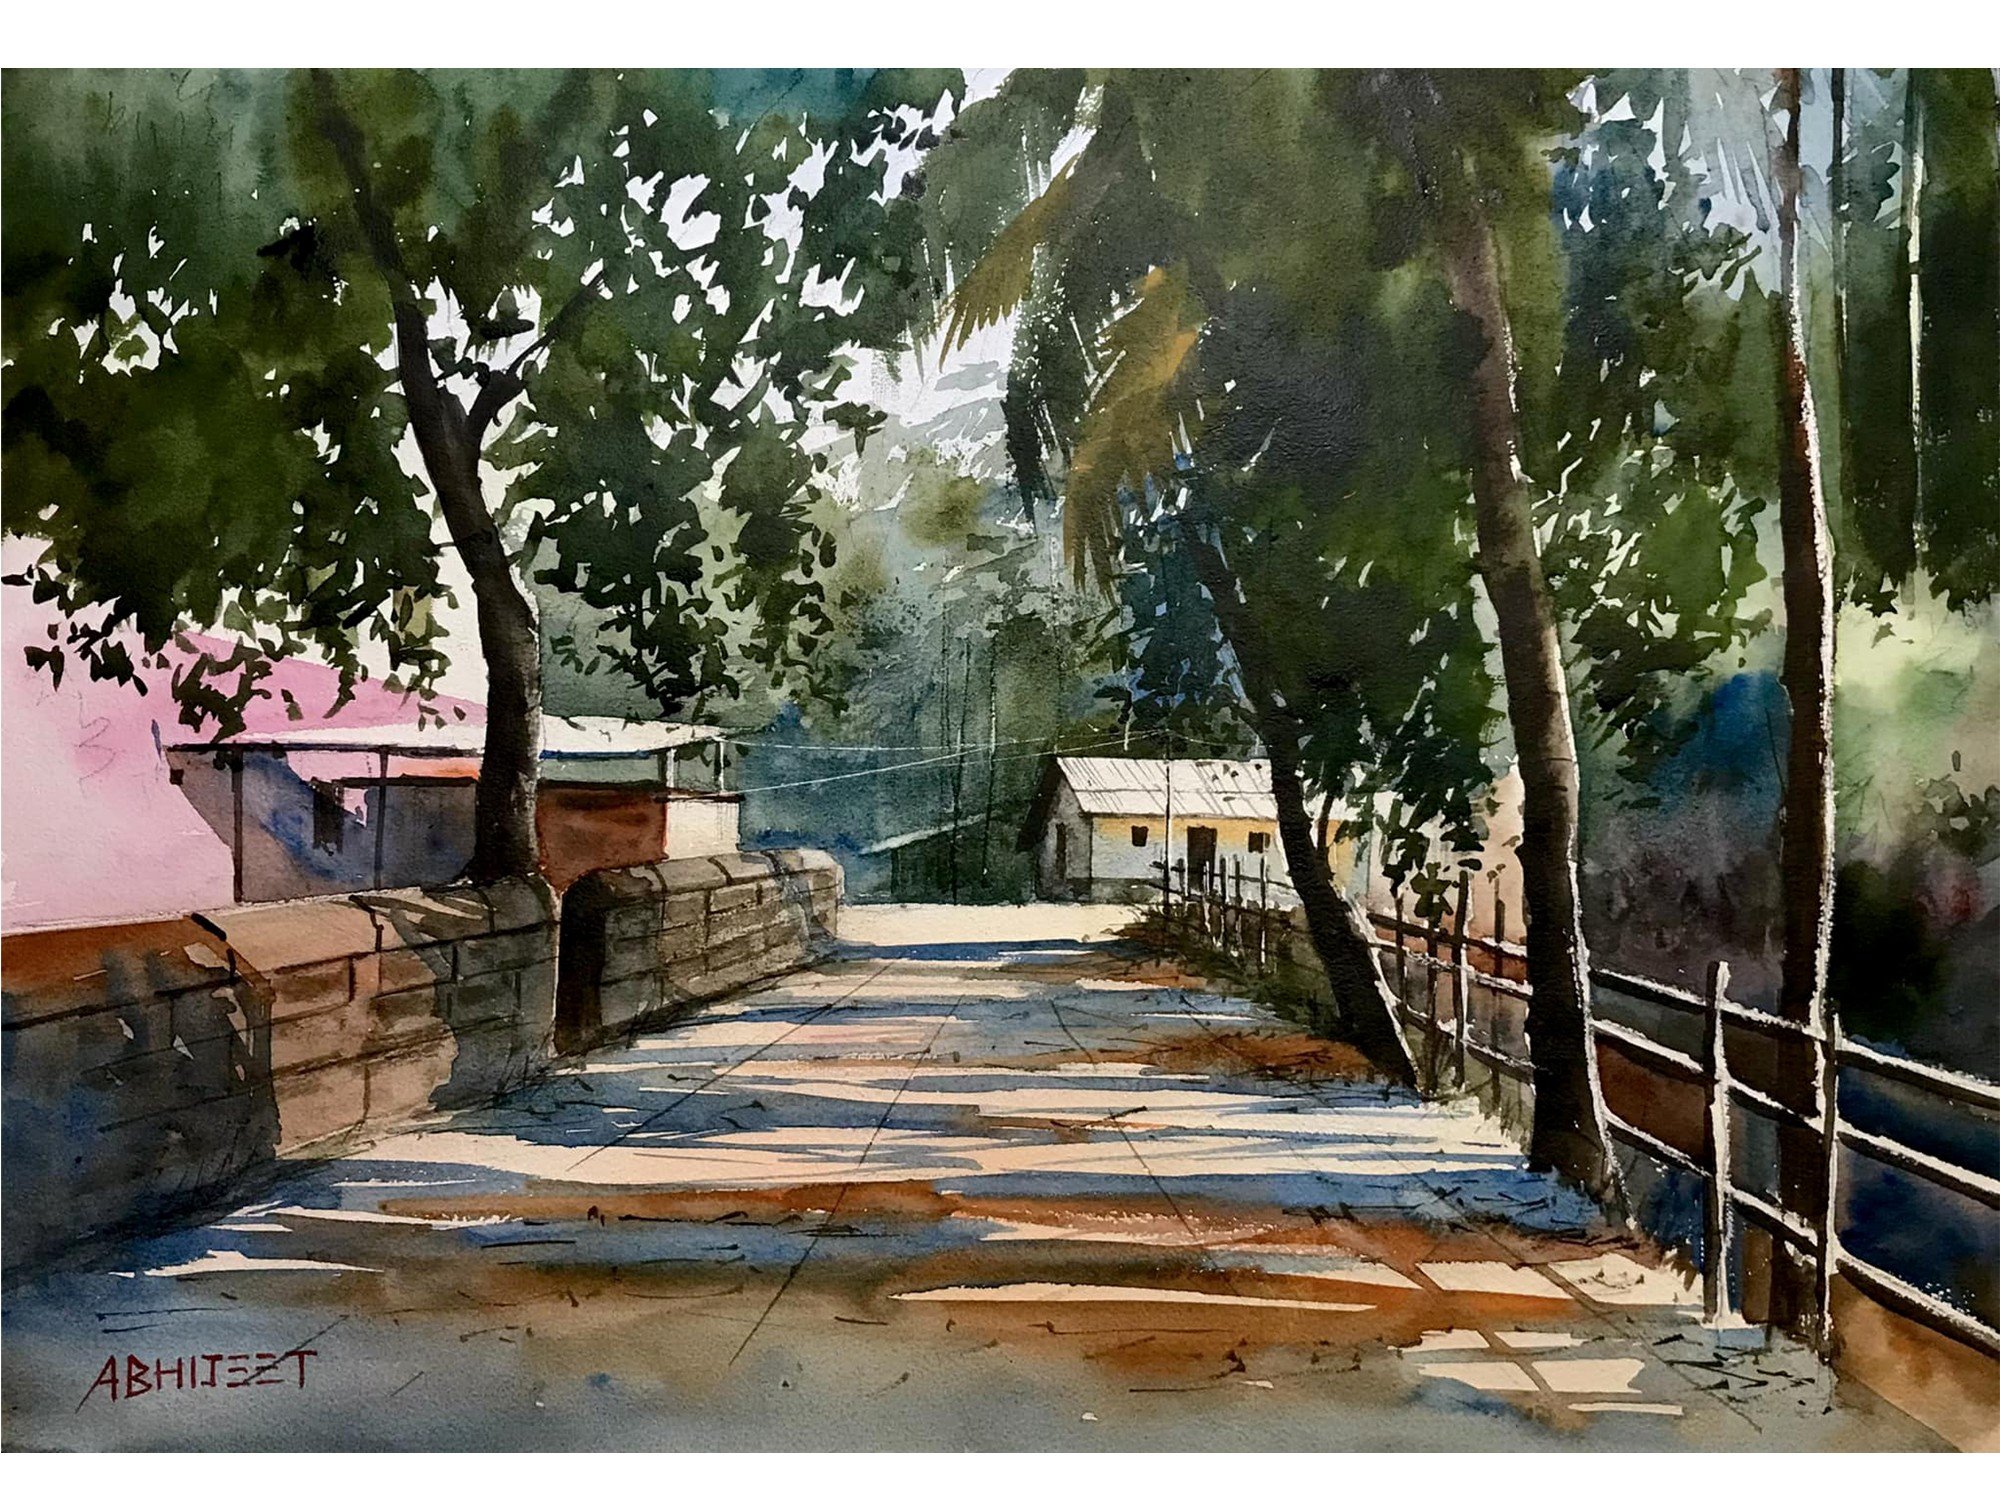 Back To My Village Watercolor Painting By Abhijeet Bahadure